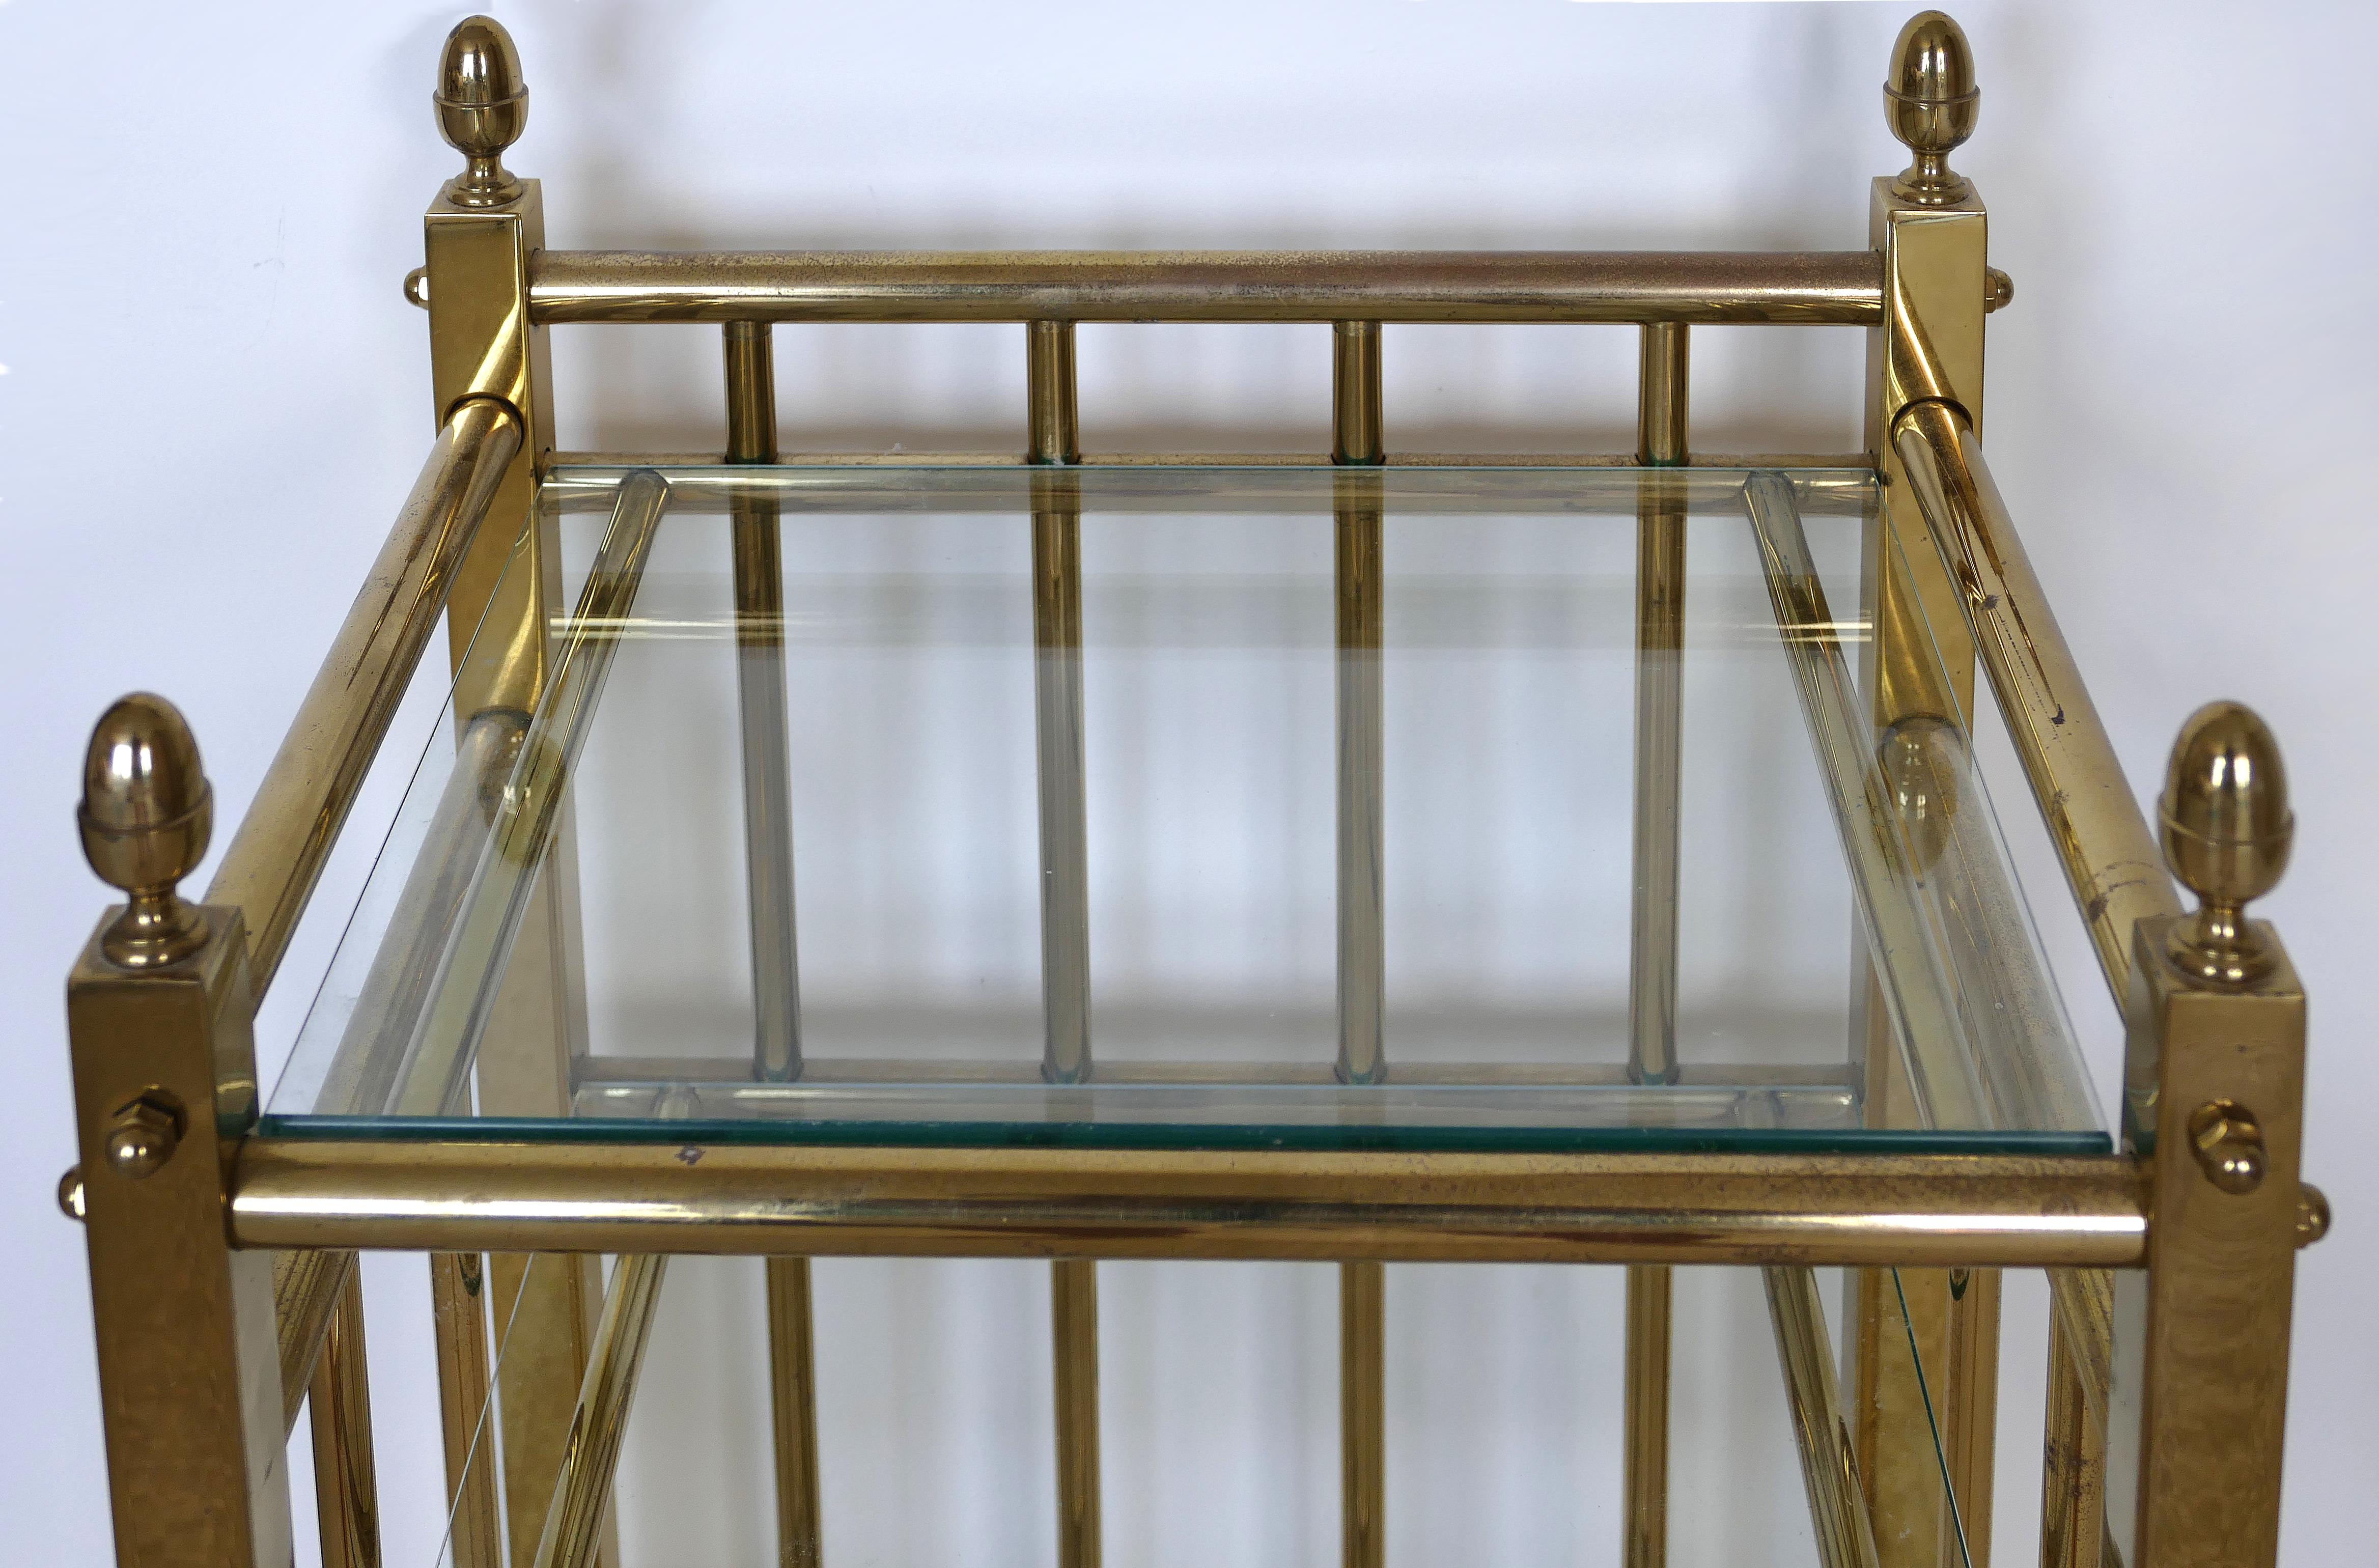 Petite 3-tier brass rolling cart side table with glass shelves

Offered for sale is a traditionally styled petite 3-tier rolling brass cart which functions nicely as a side table. The cart is created in brass with each tier supporting a thick